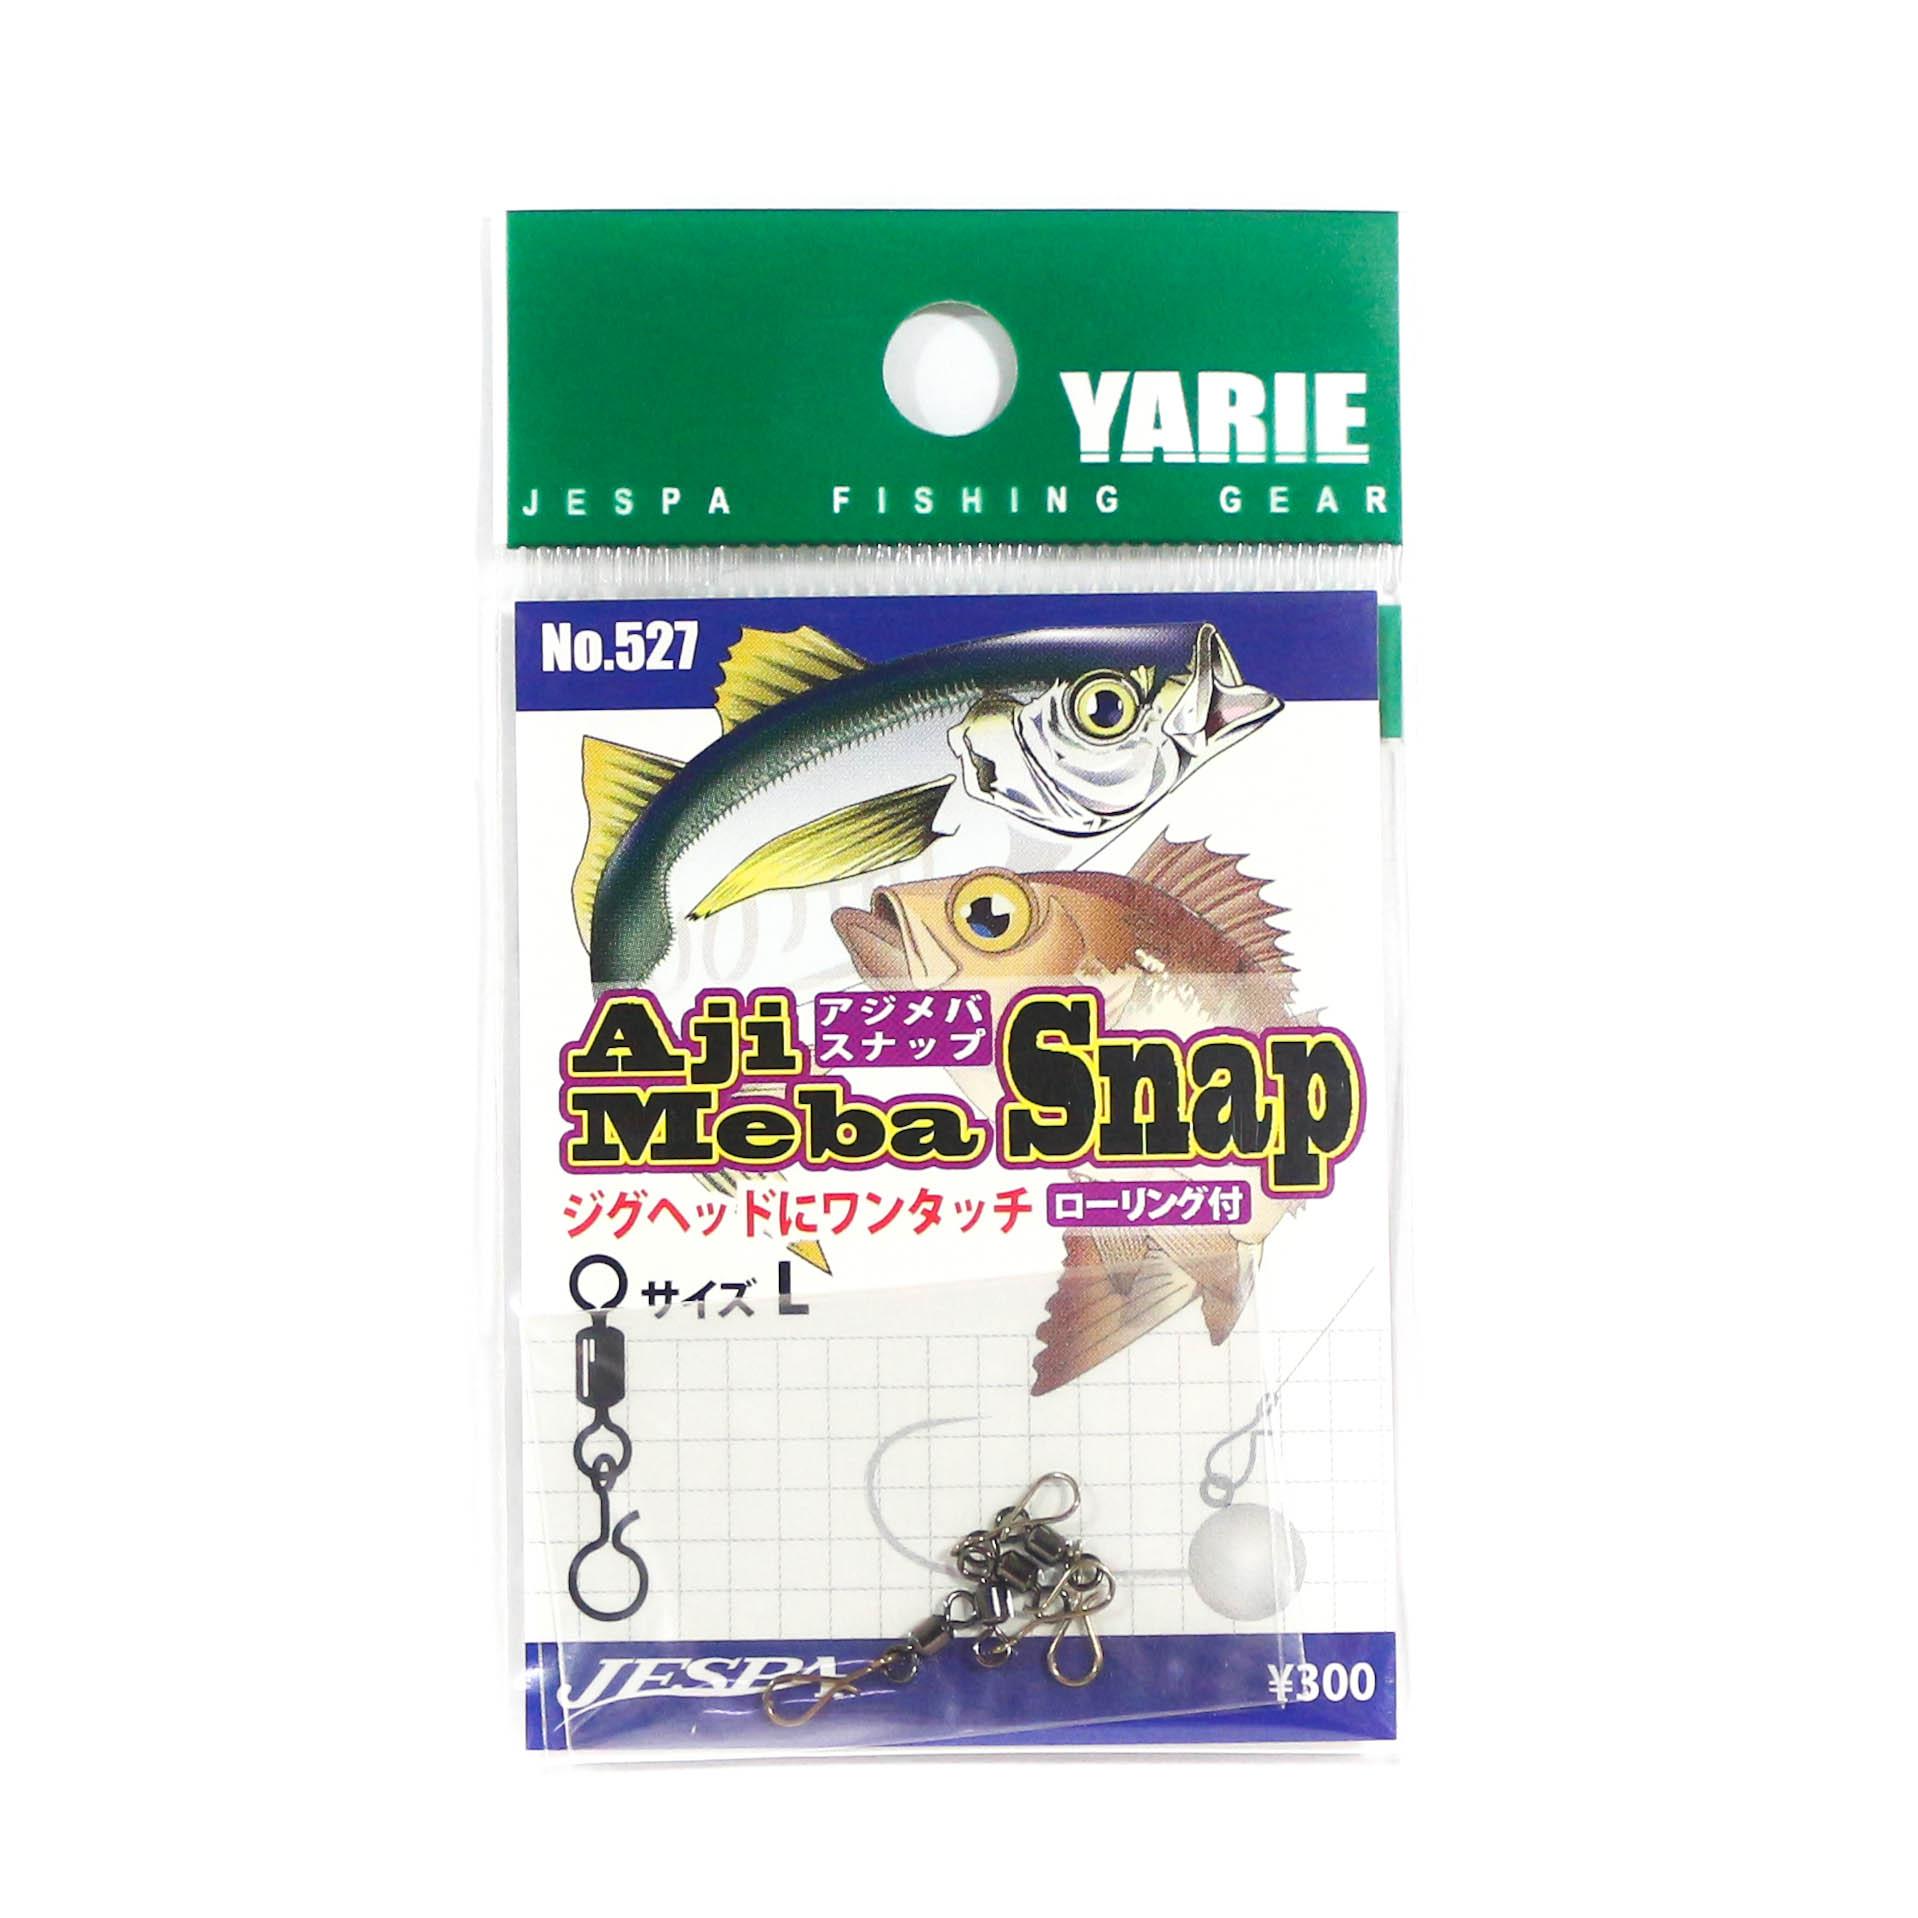 530 Quick Snap Ring for Small Lures Fly 7 lb Test Size M Yarie Jespa M 4062 